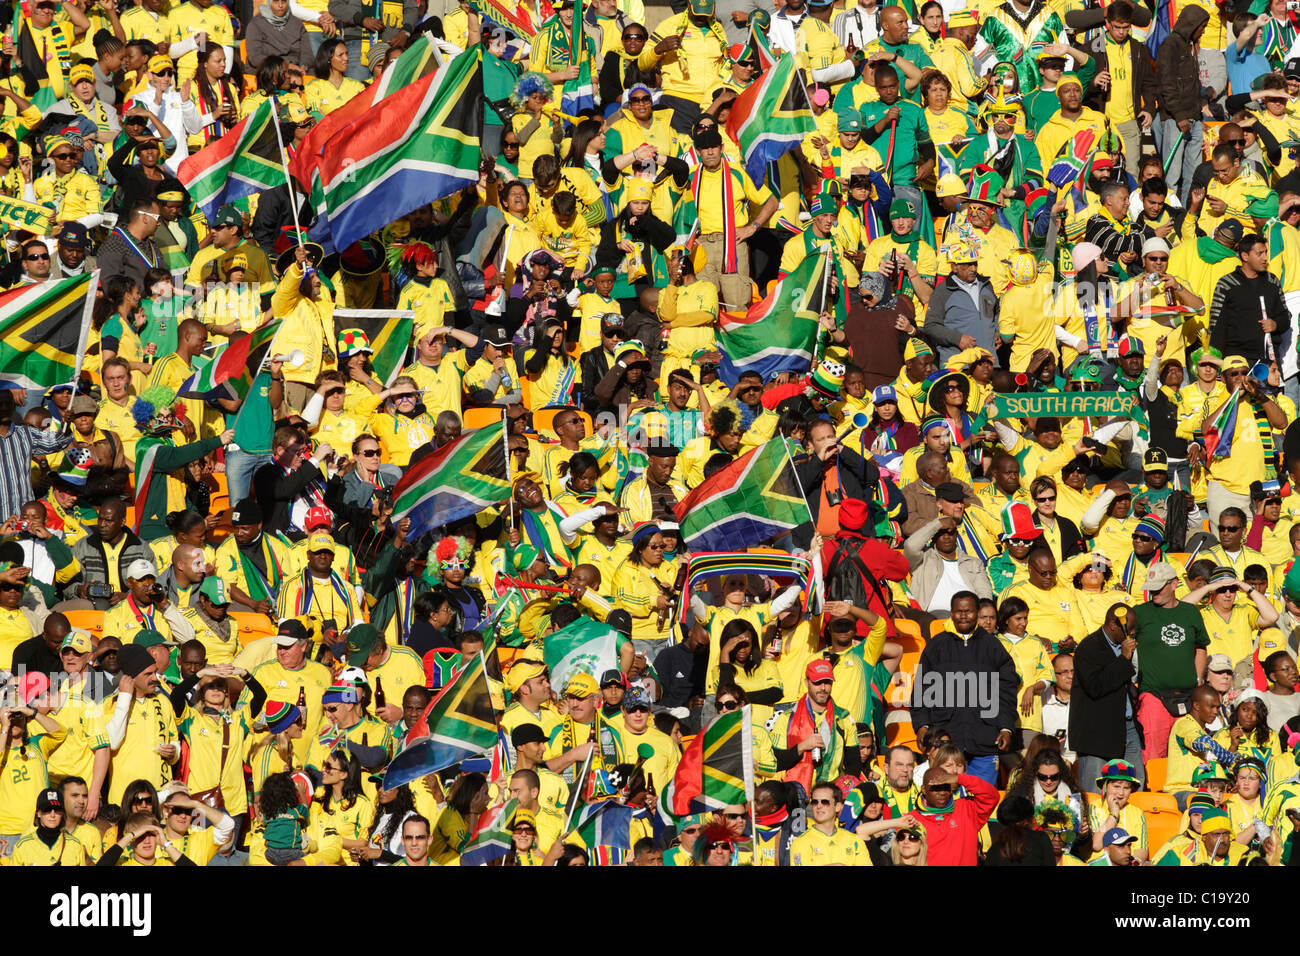 South Africa supporters pack the stands at the opening match of the 2010 FIFA World Cup between South Africa and Mexico. Stock Photo